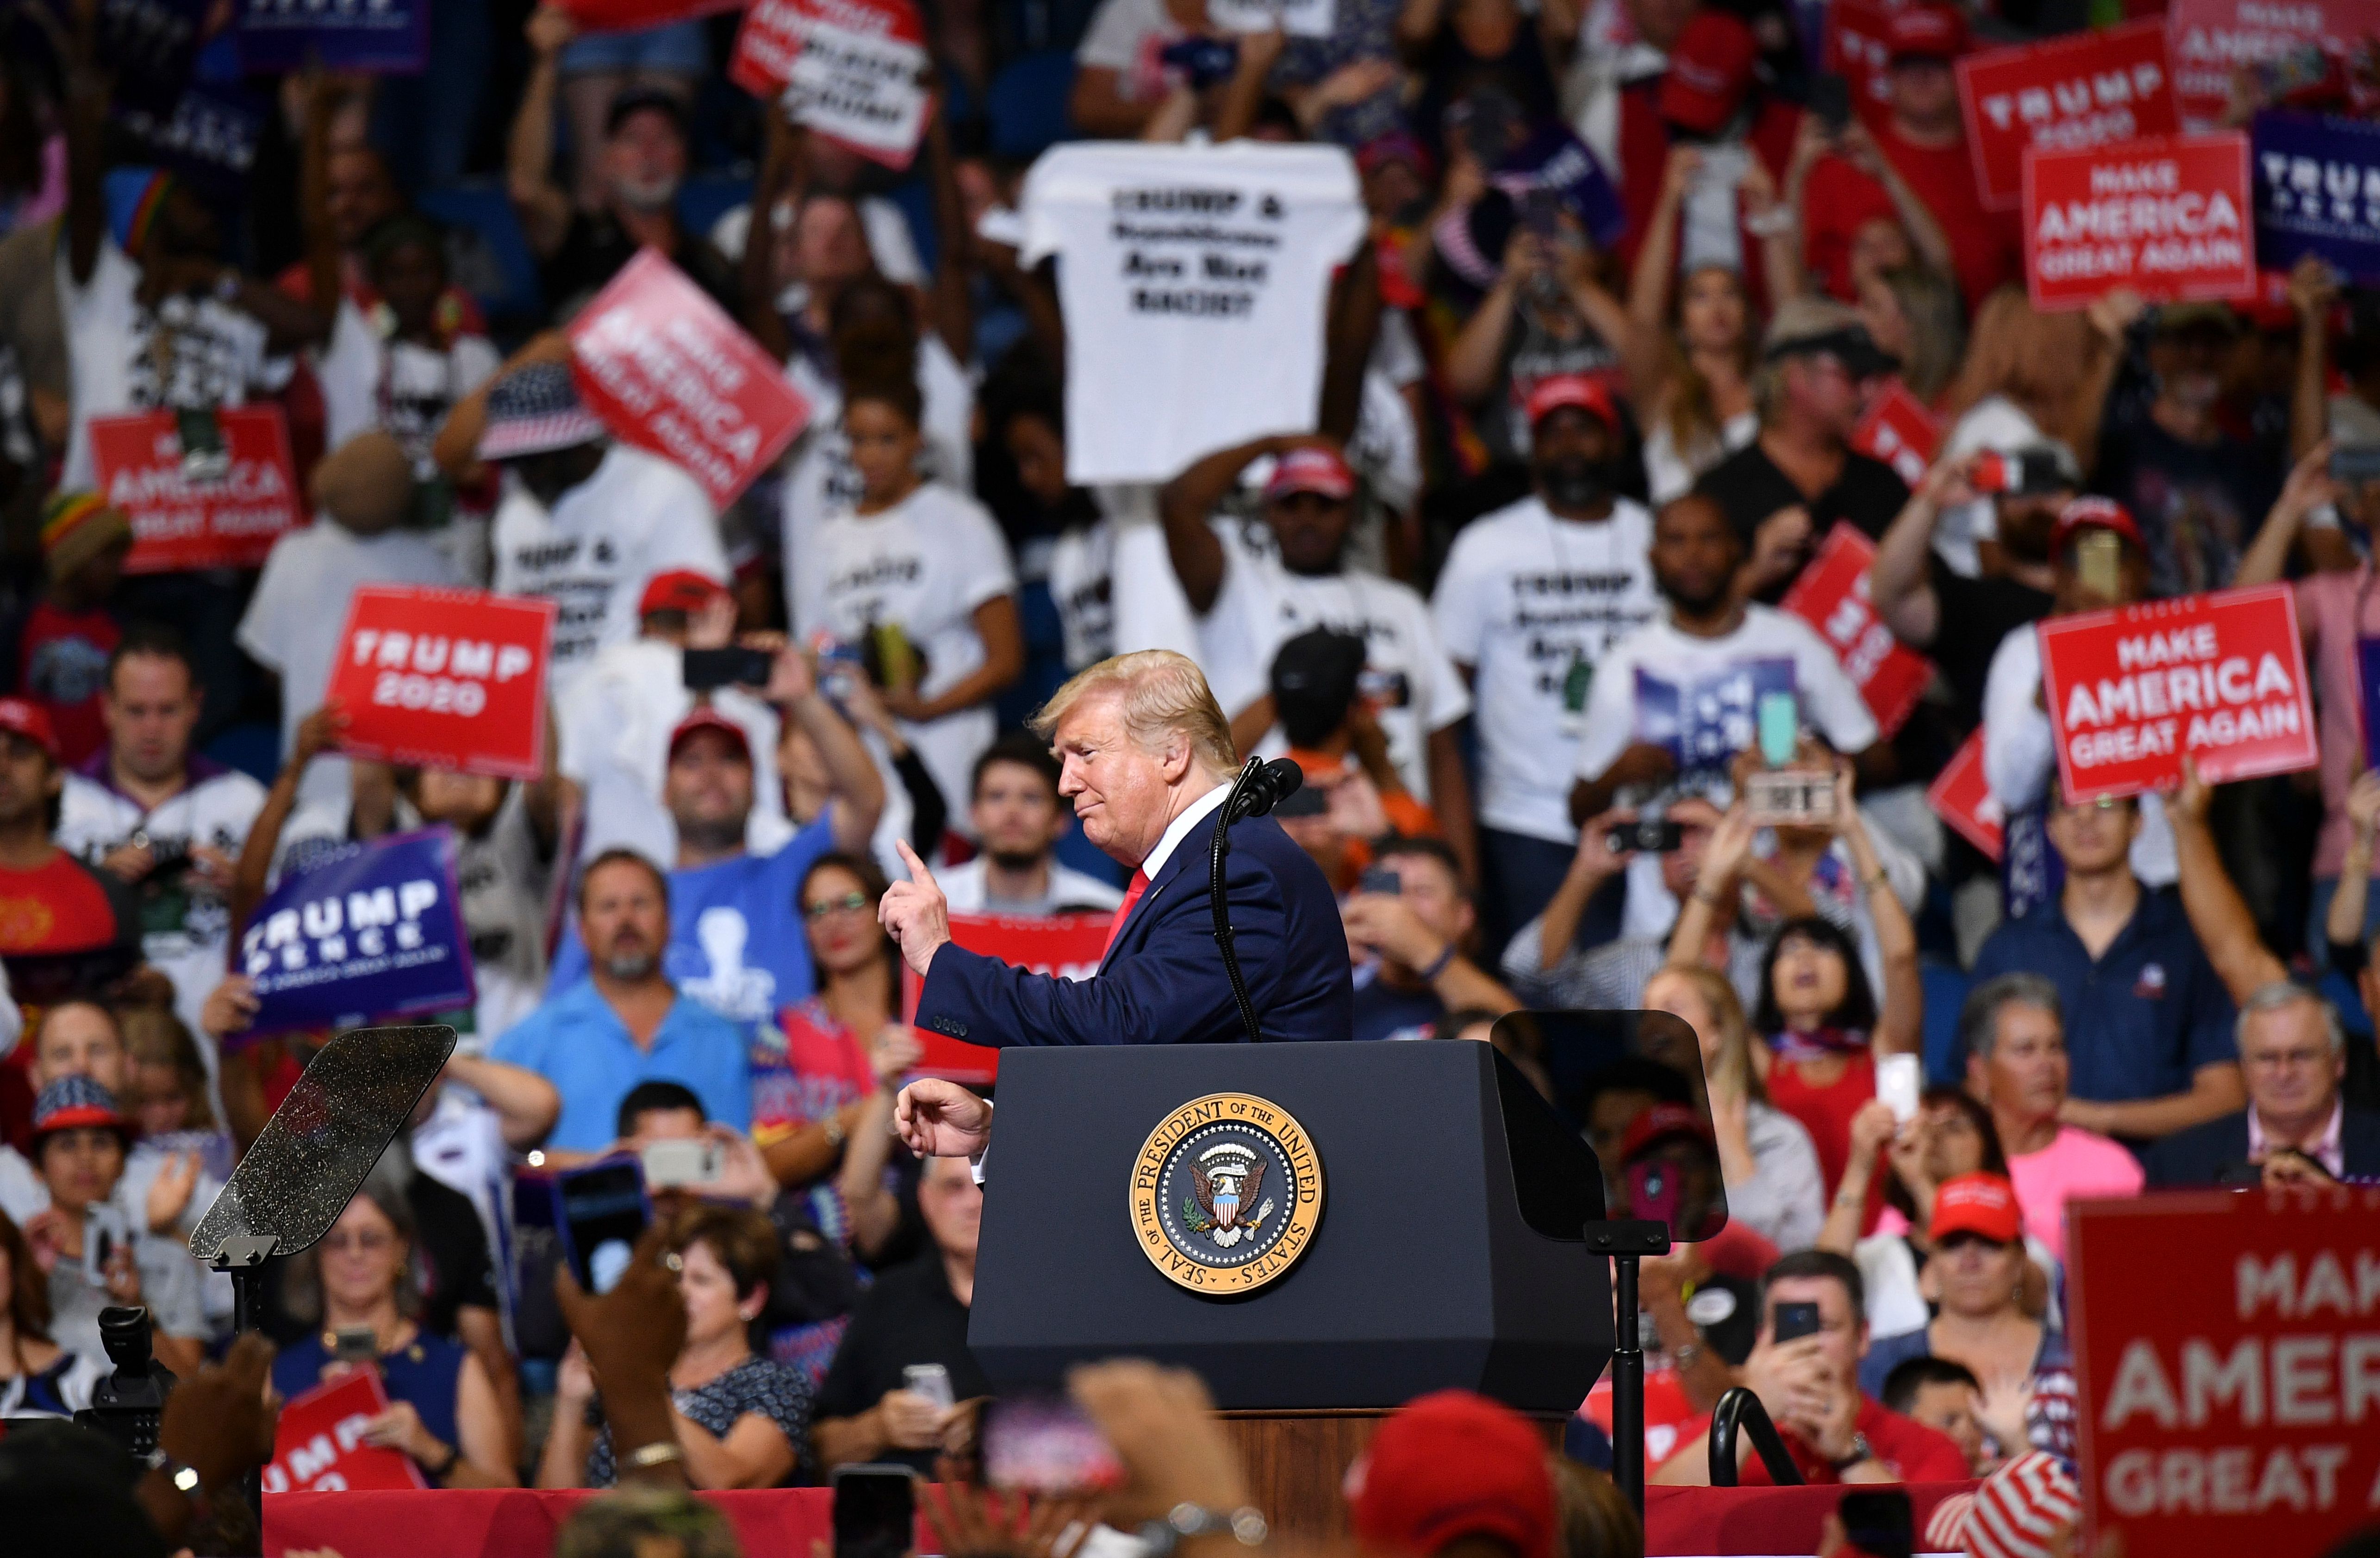 President Trump gestures after a rally at the Amway Center in Orlando, Florida, to officially launch his 2020 campaign on June 18, 2019.